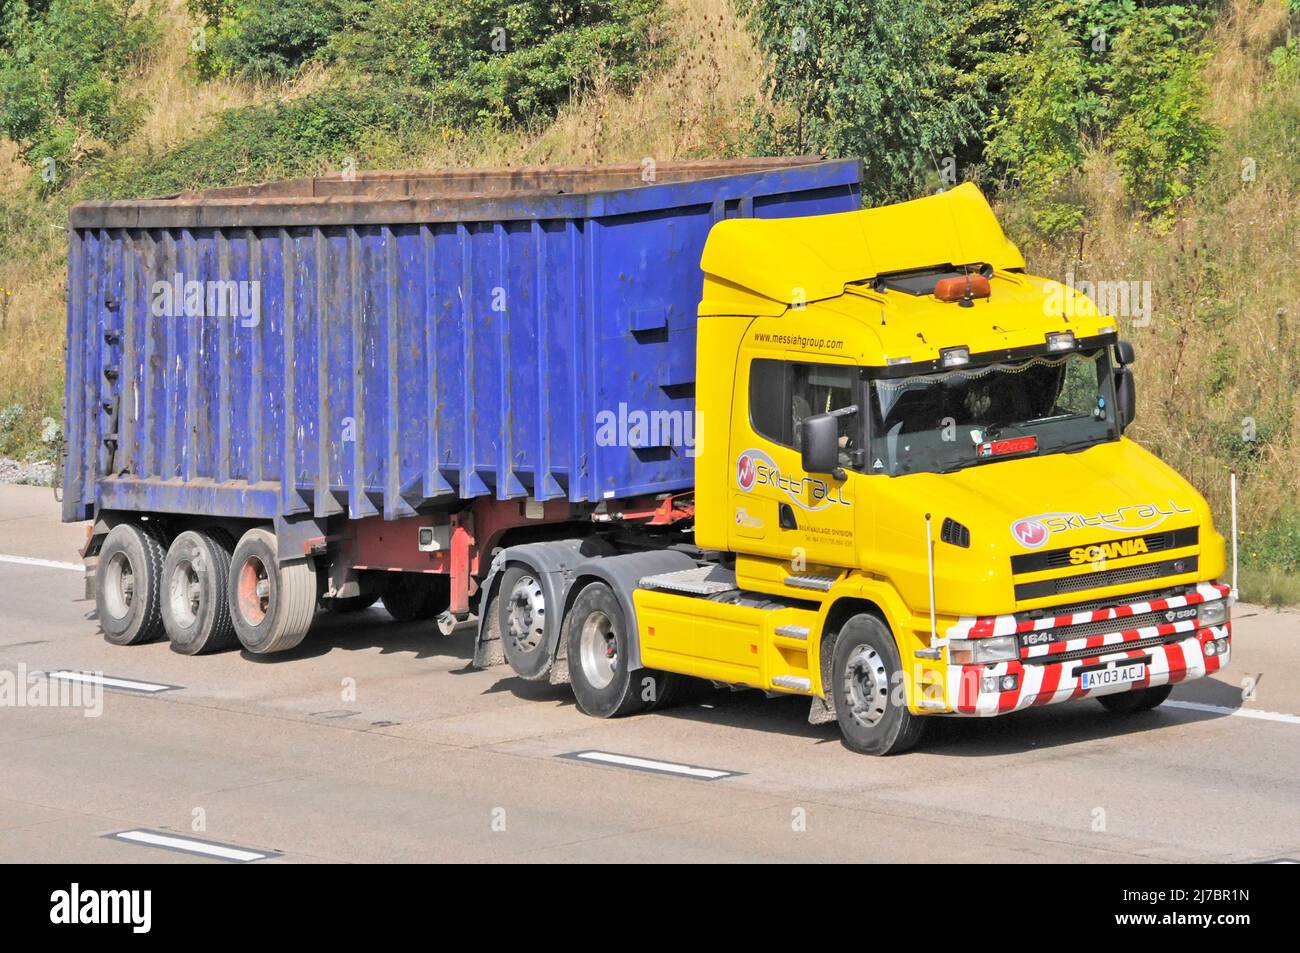 Haulage contractor business yellow bonneted hgv SCANIA lorry truck blue unmarked dirty articulated tipper trailer driving along on English UK motorway Stock Photo